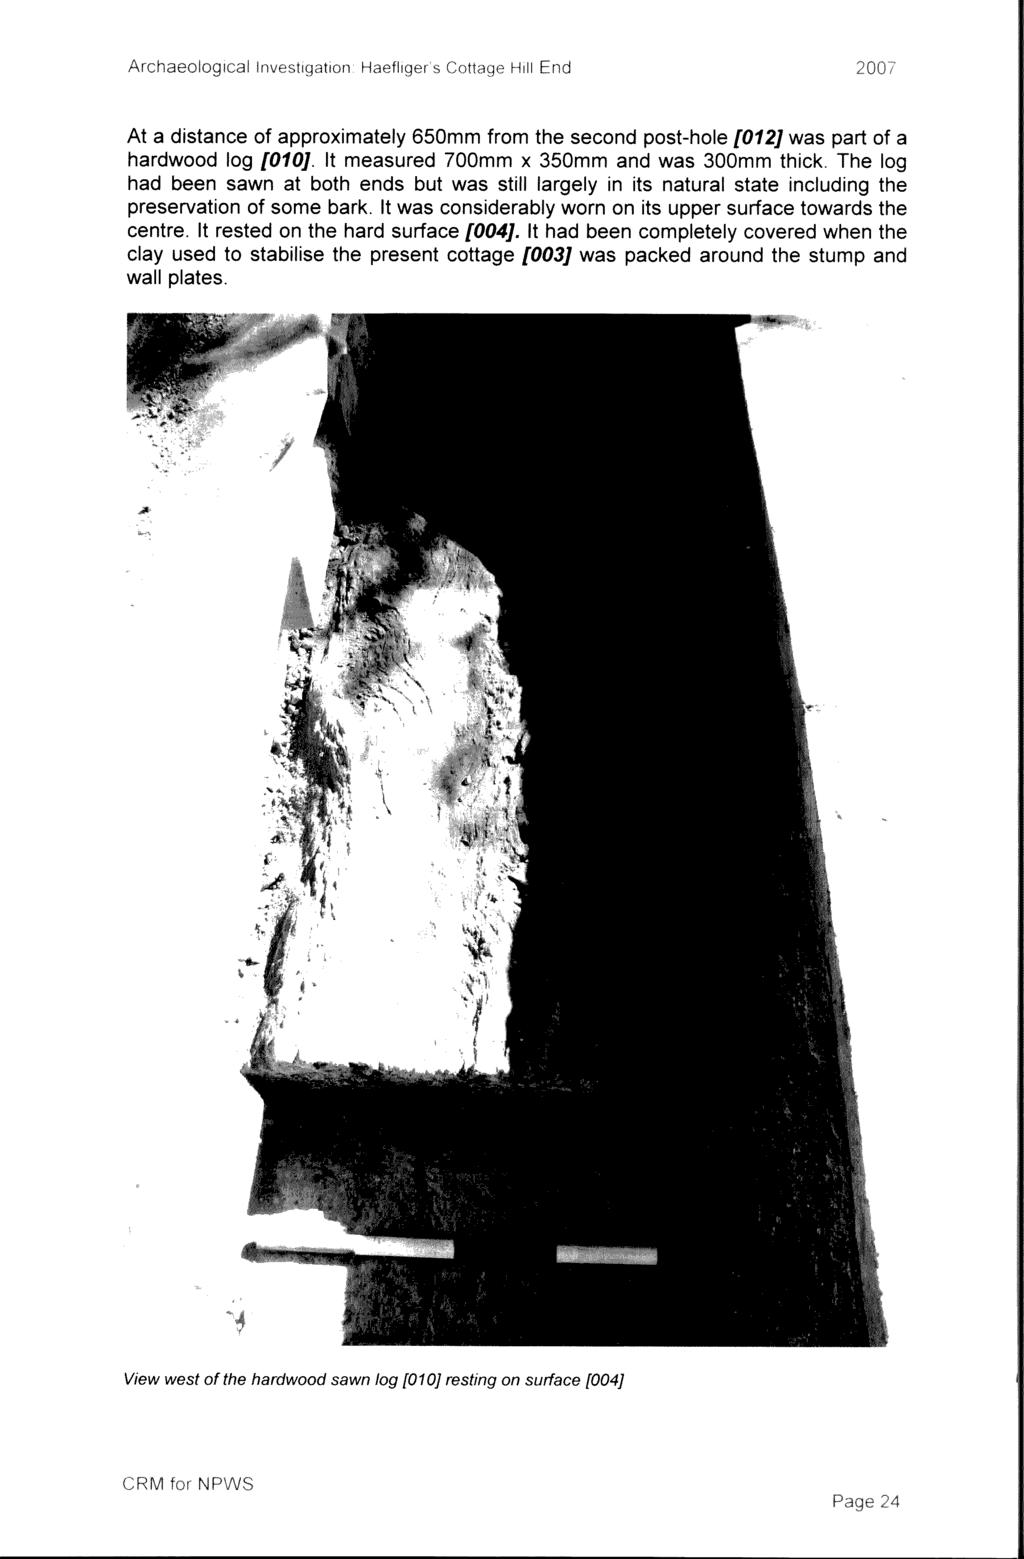 Hili End At a distance of approximately 650mm from the second post-hole [012J was part of a hardwood log [010). It measured 700mm x 350mm and was 300mm thick.